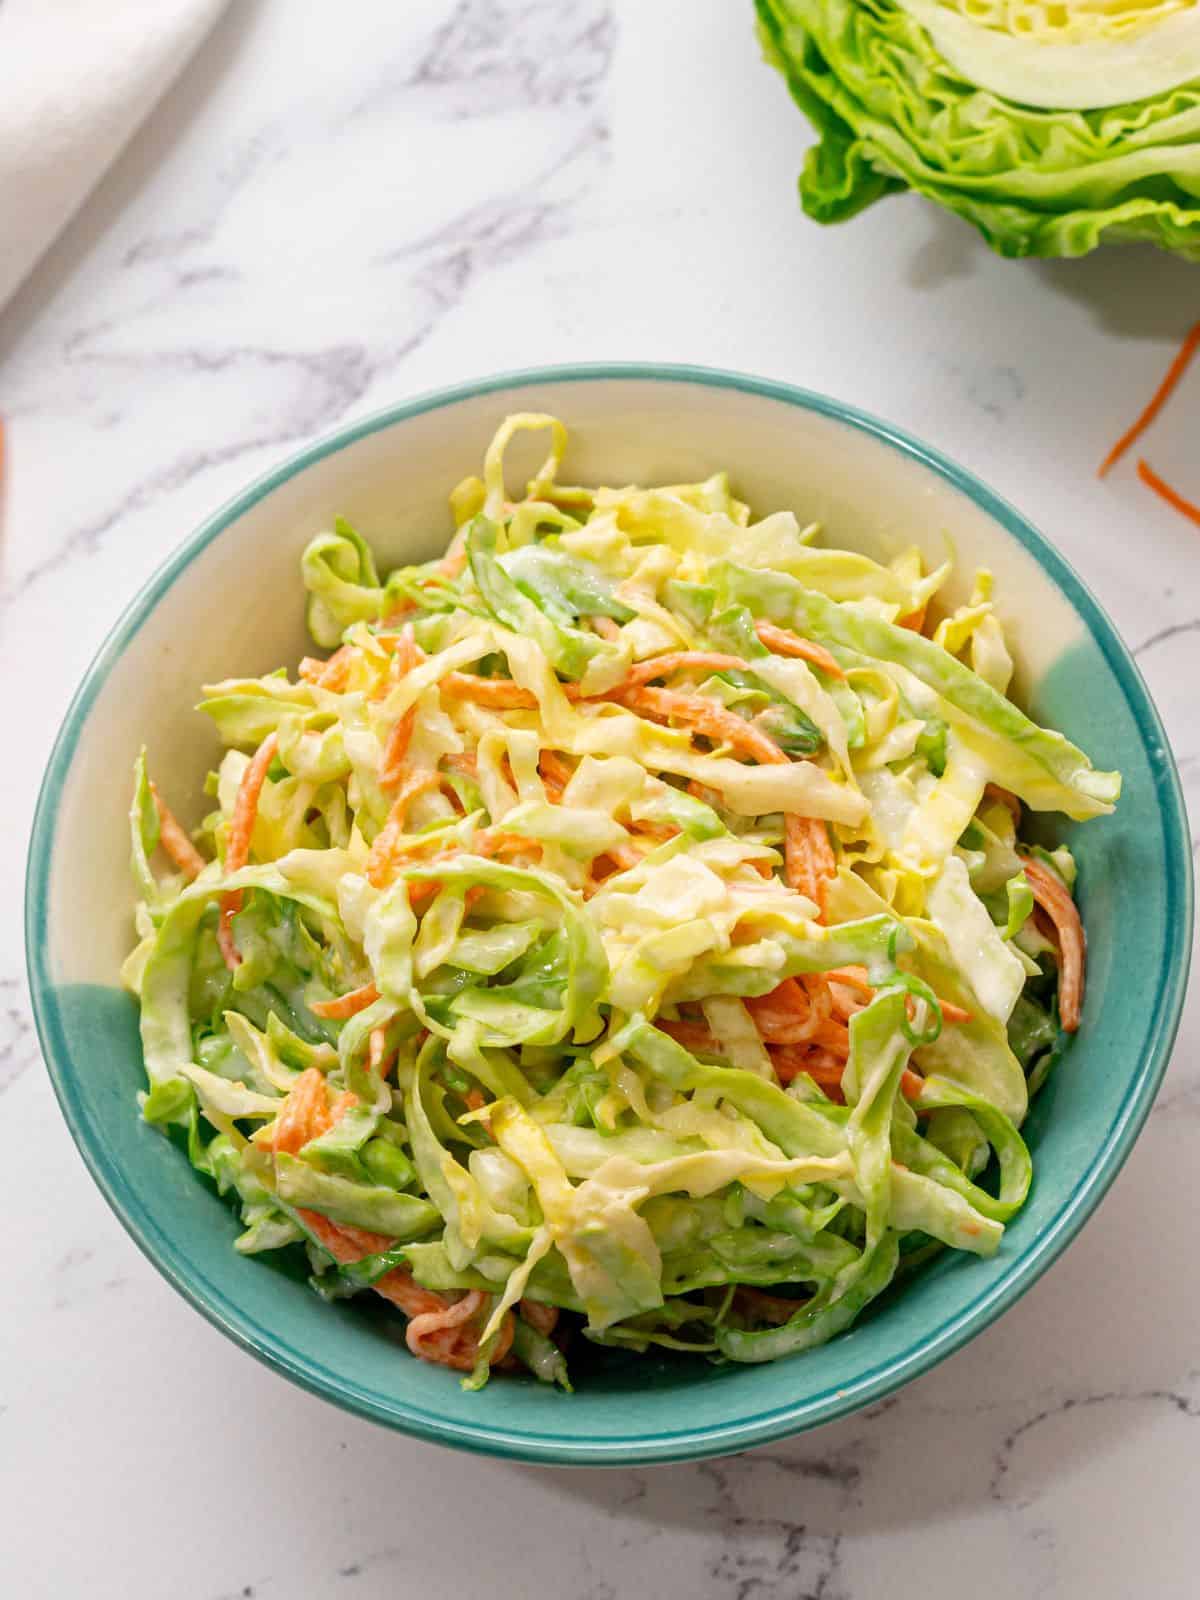 Bowl of homemade creamy coleslaw on white counter.